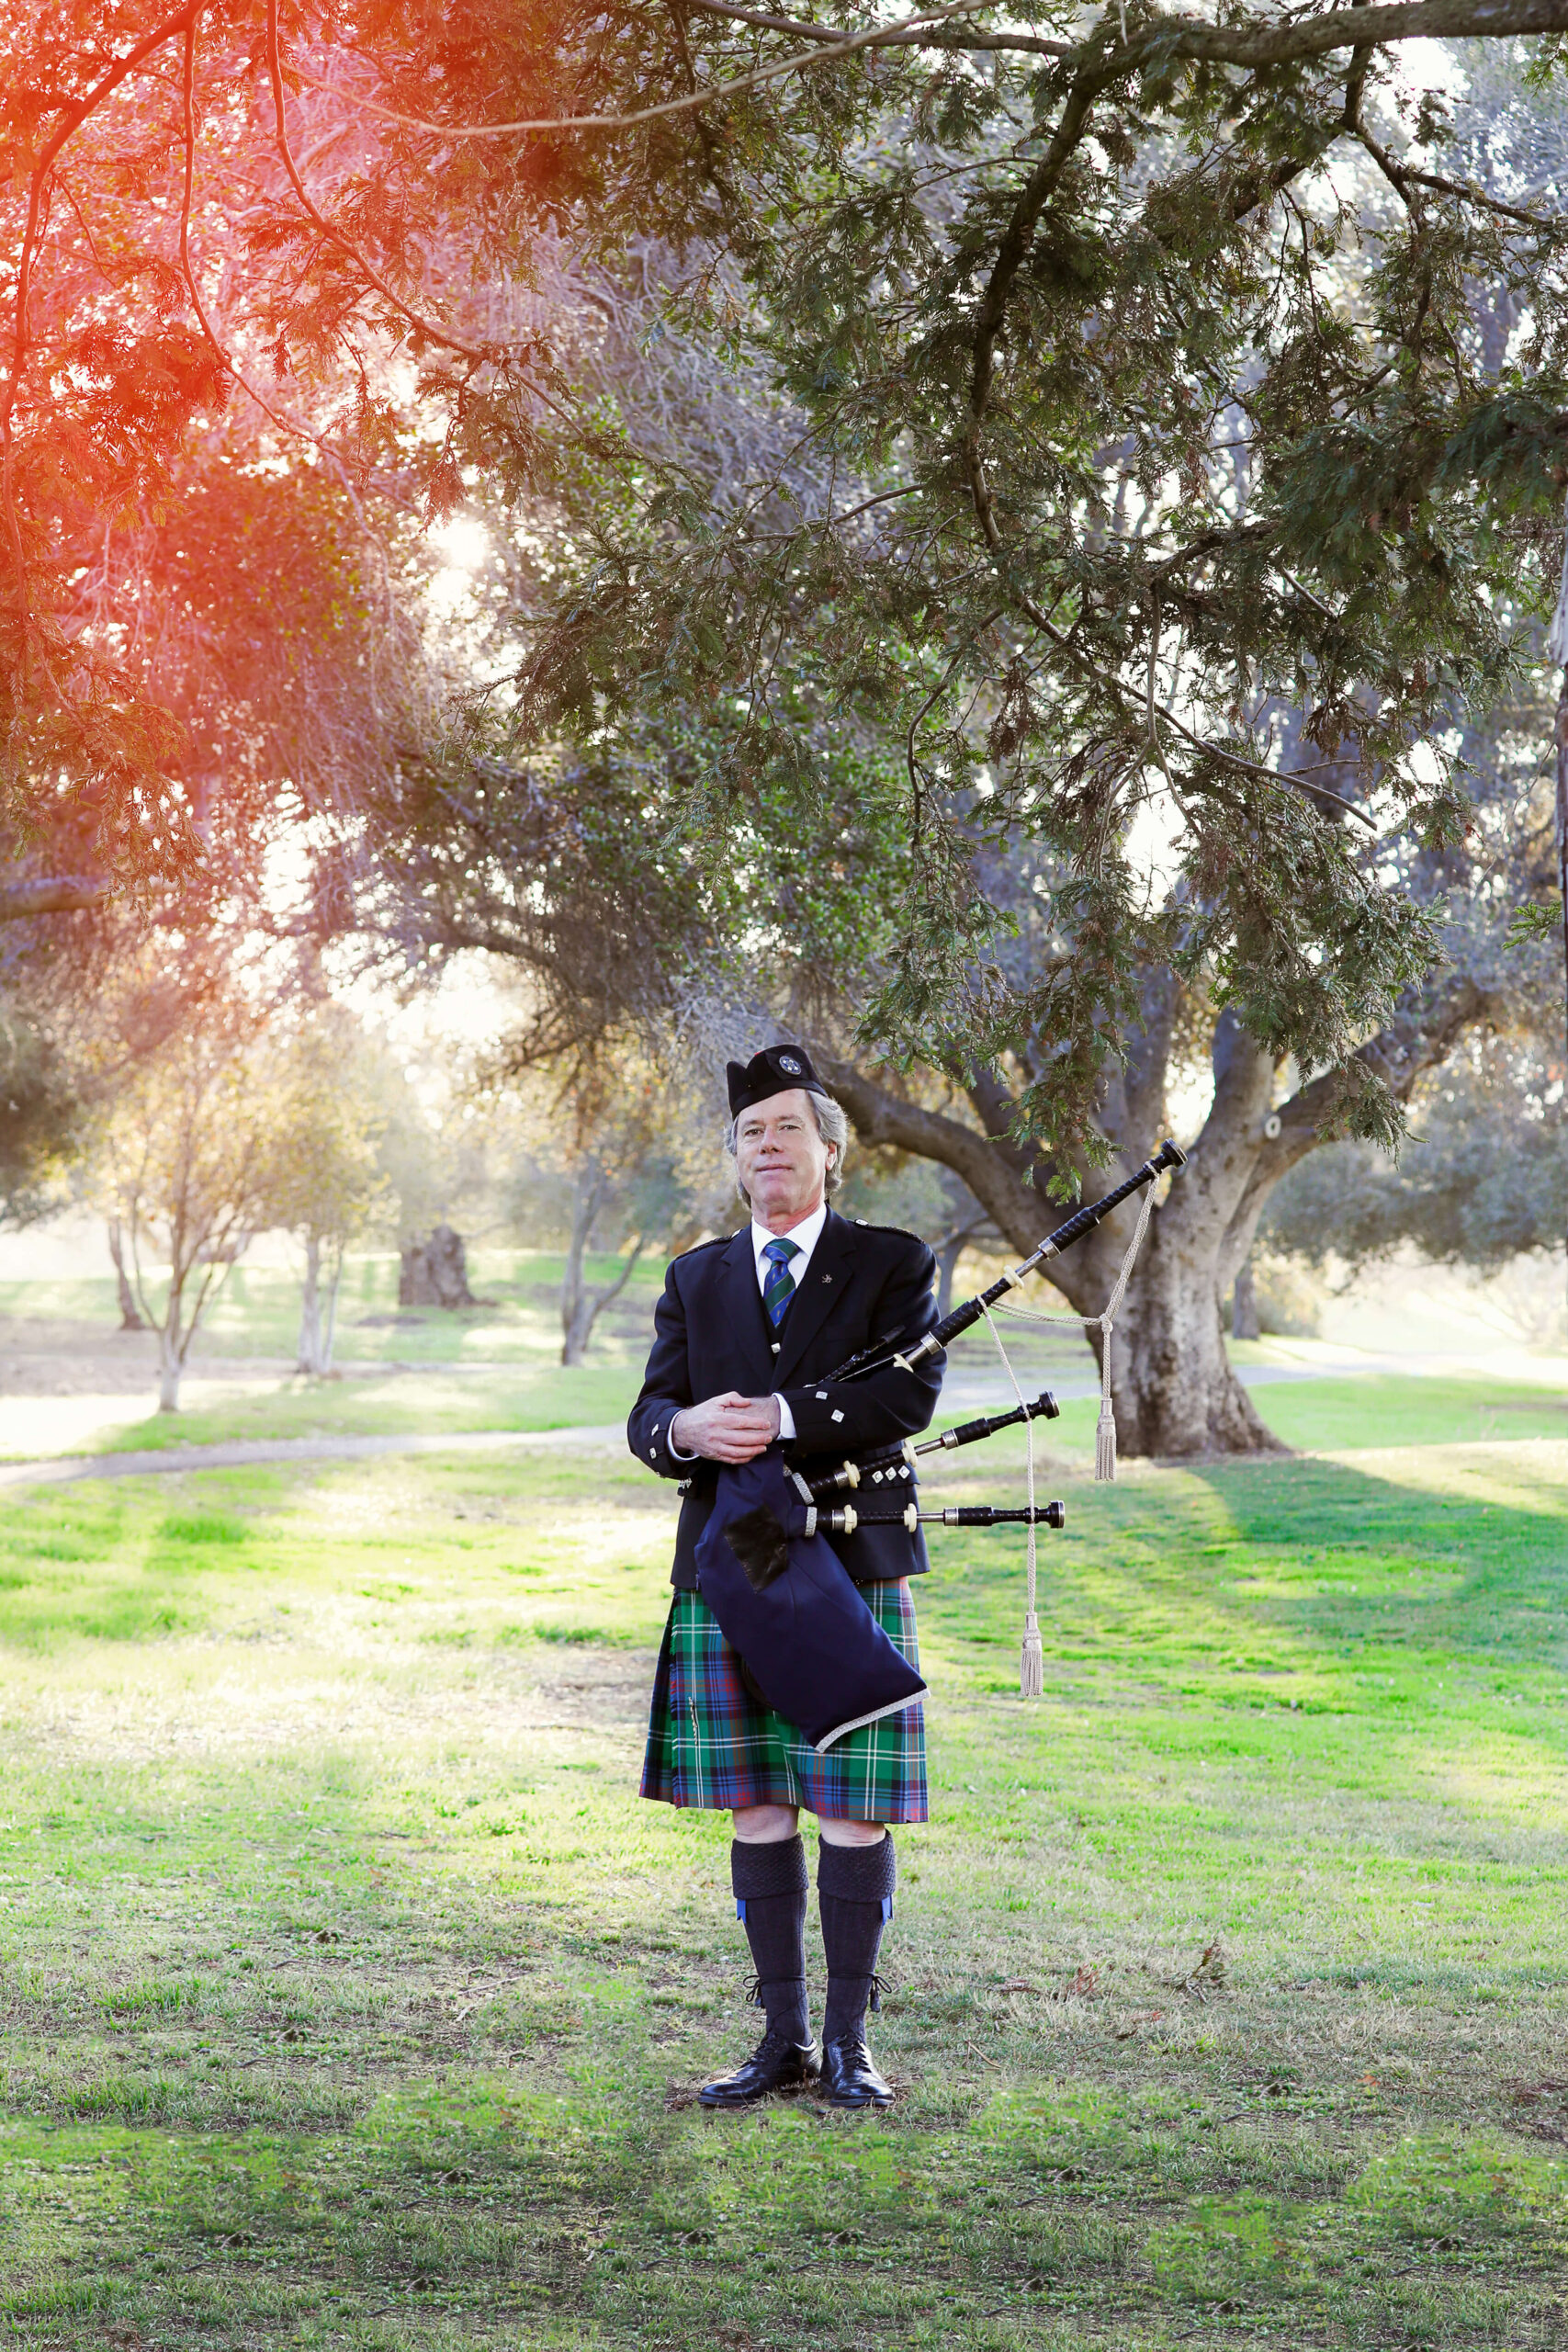 The Piper of Menlo Park - Punch Magazine